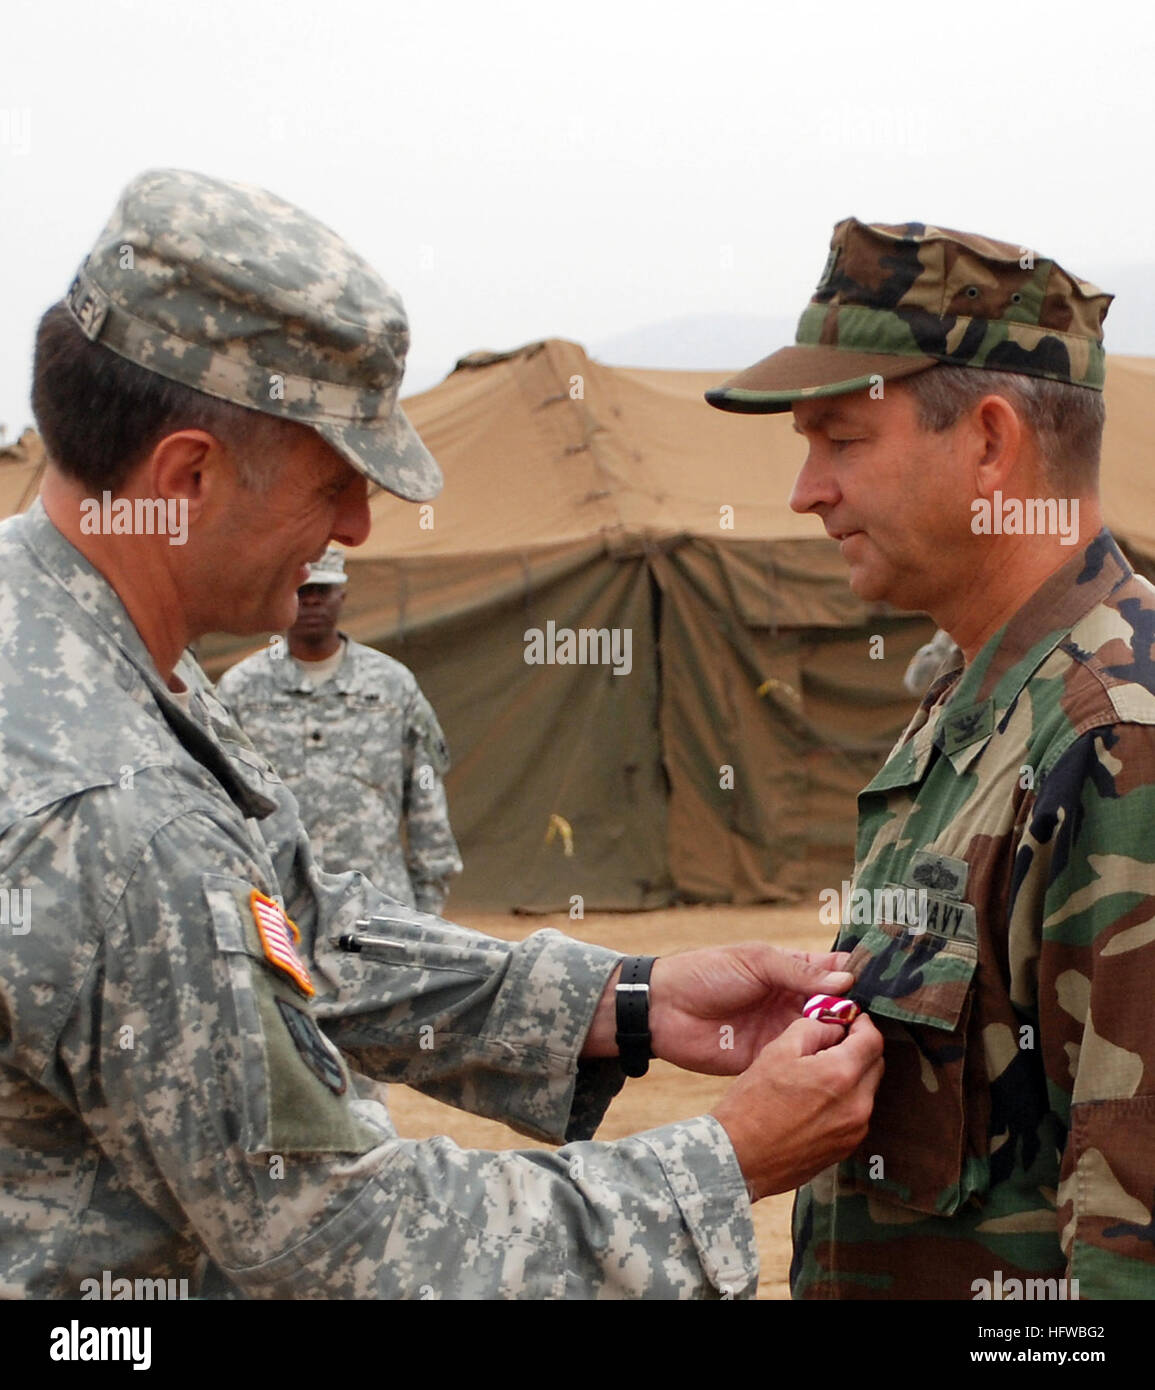 080801-N-4973M-052 CAMP PENDLETON, Calif. (August 1, 2008) Brig. Gen. Mark MacCorley, deputy commander of Joint Task Force (JTF) 8, awards the Meritorious Service Medal to Capt. Thomas Weatherald, commander of Joint Logistics Over-The-Shore (JLOTS) 2008. JLOTS 2008 is an engineering, logistical training exercise between Army and Navy units under a joint force commander as a means to load and unload ships without the benefit of deep draft-capable, fixed port facilities. (U.S. Navy photo by Mass Communication Specialist 3rd Class Brian Morales/Released) US Navy 080801-N-4973M-052 Brig. Gen. Mark Stock Photo